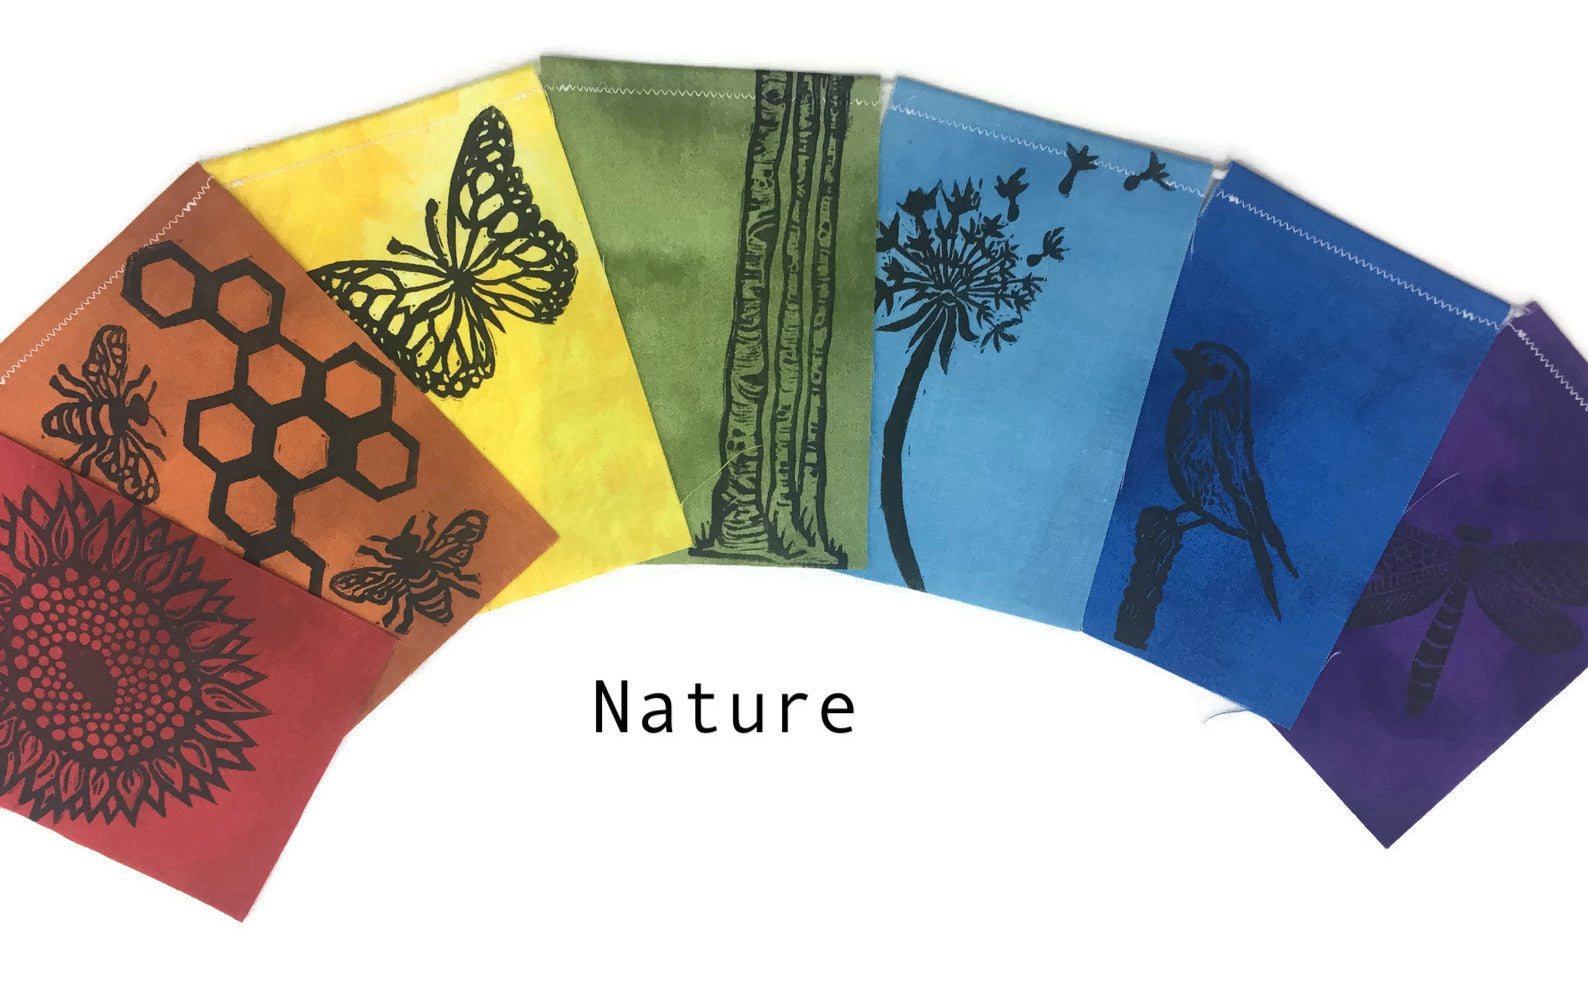 Small Flag Set with images of nature handprinted on them